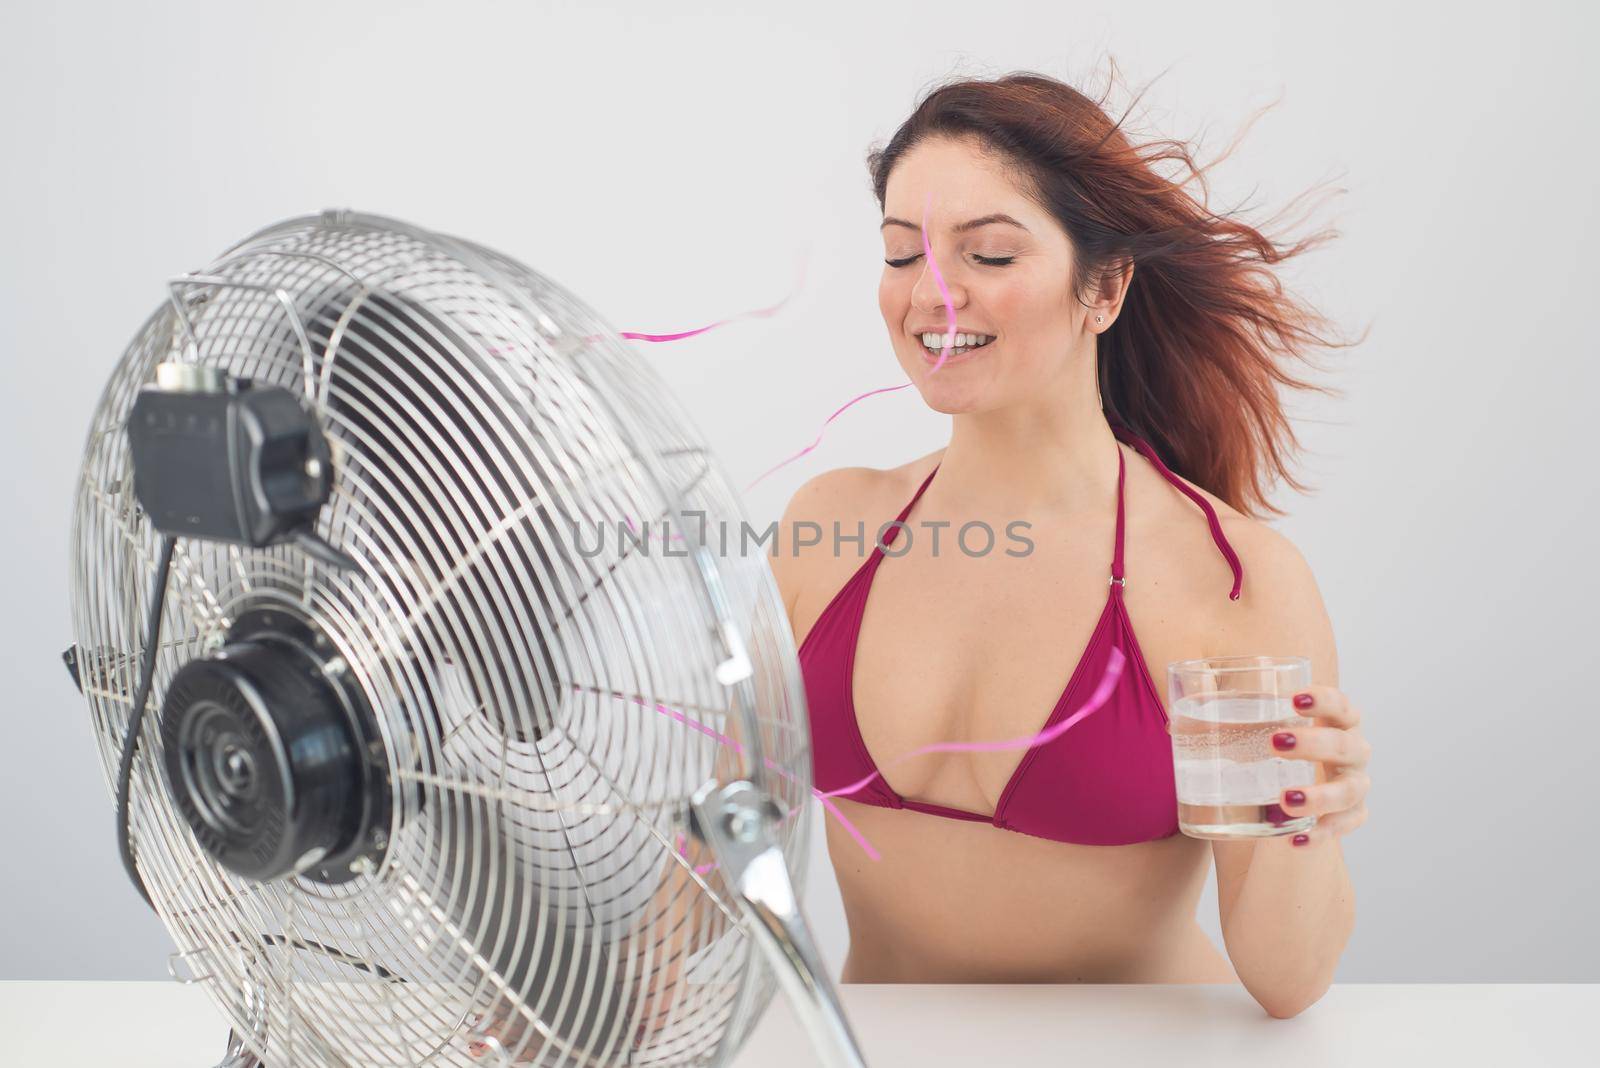 Red-haired smiling woman in a bikini drinks a cold drink and enjoys the blowing wind from an electric fan on a white background. Climate control on a hot summer day.